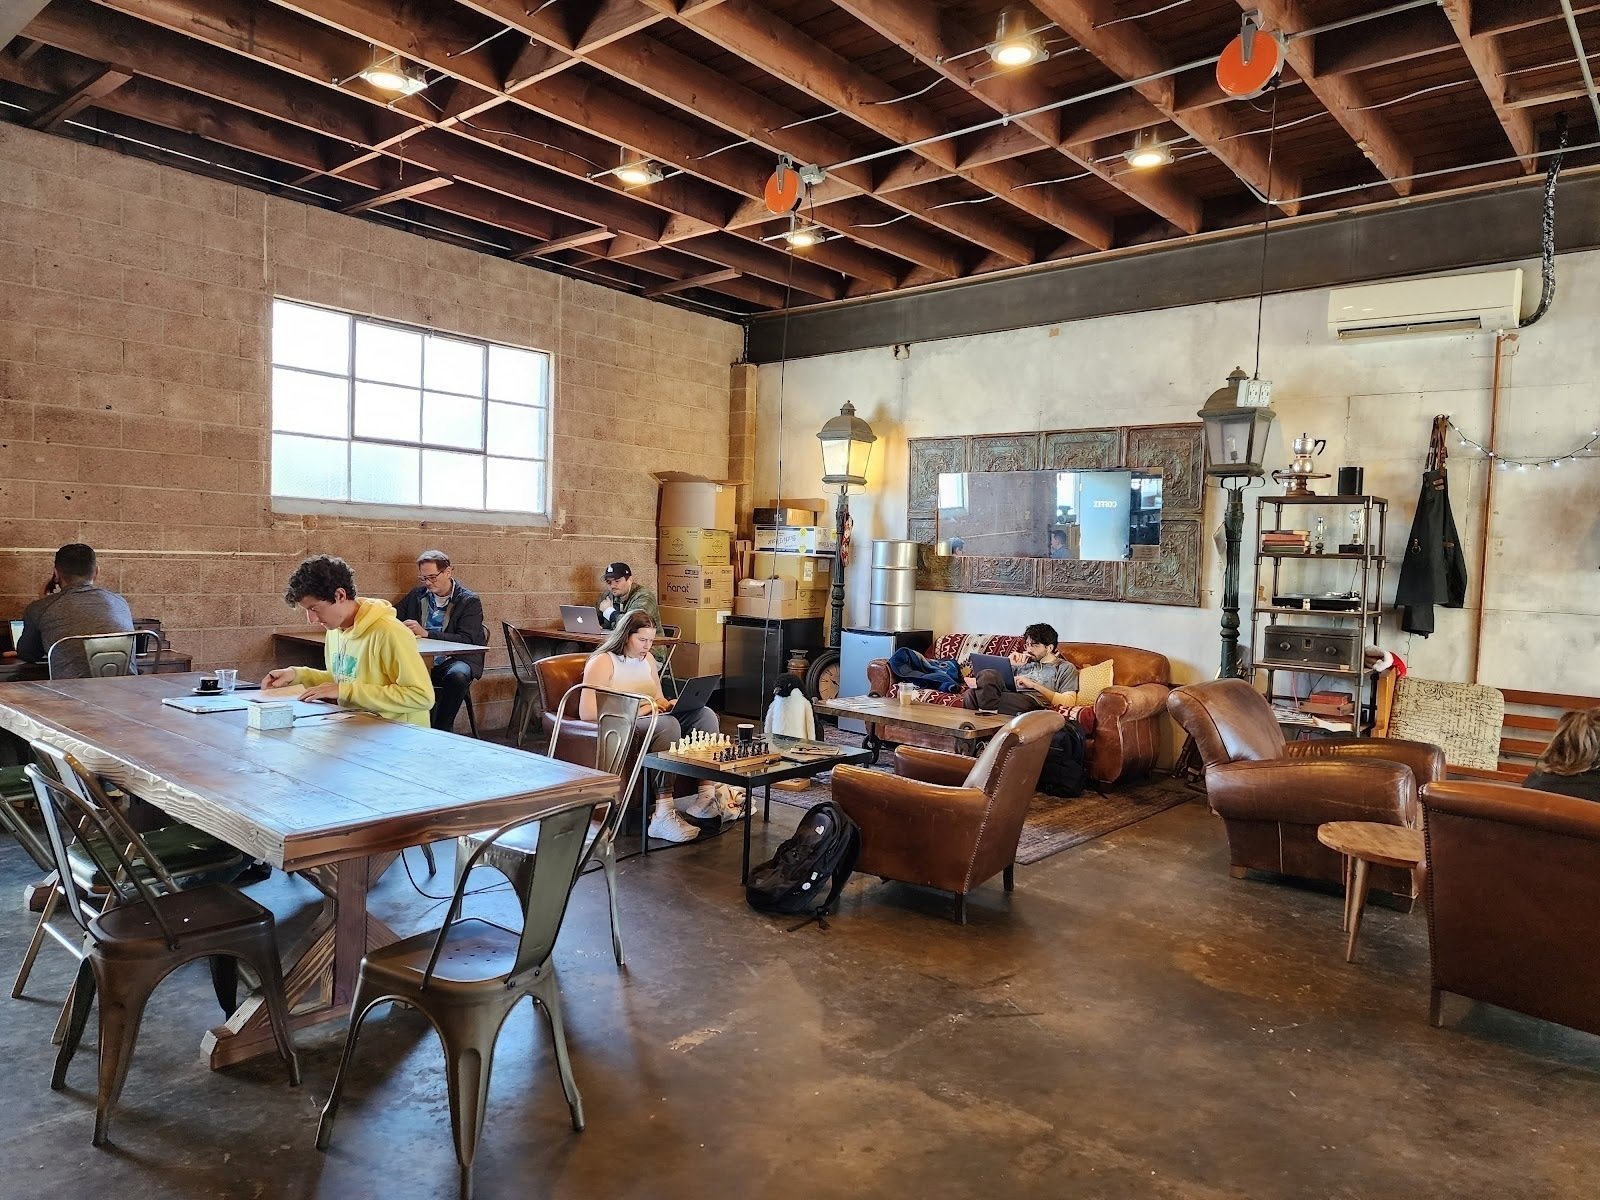 <span class="translation_missing" title="translation missing: en.meta.location_title, location_name: Smoky Hollow Roasters, city: Los Angeles">Location Title</span>